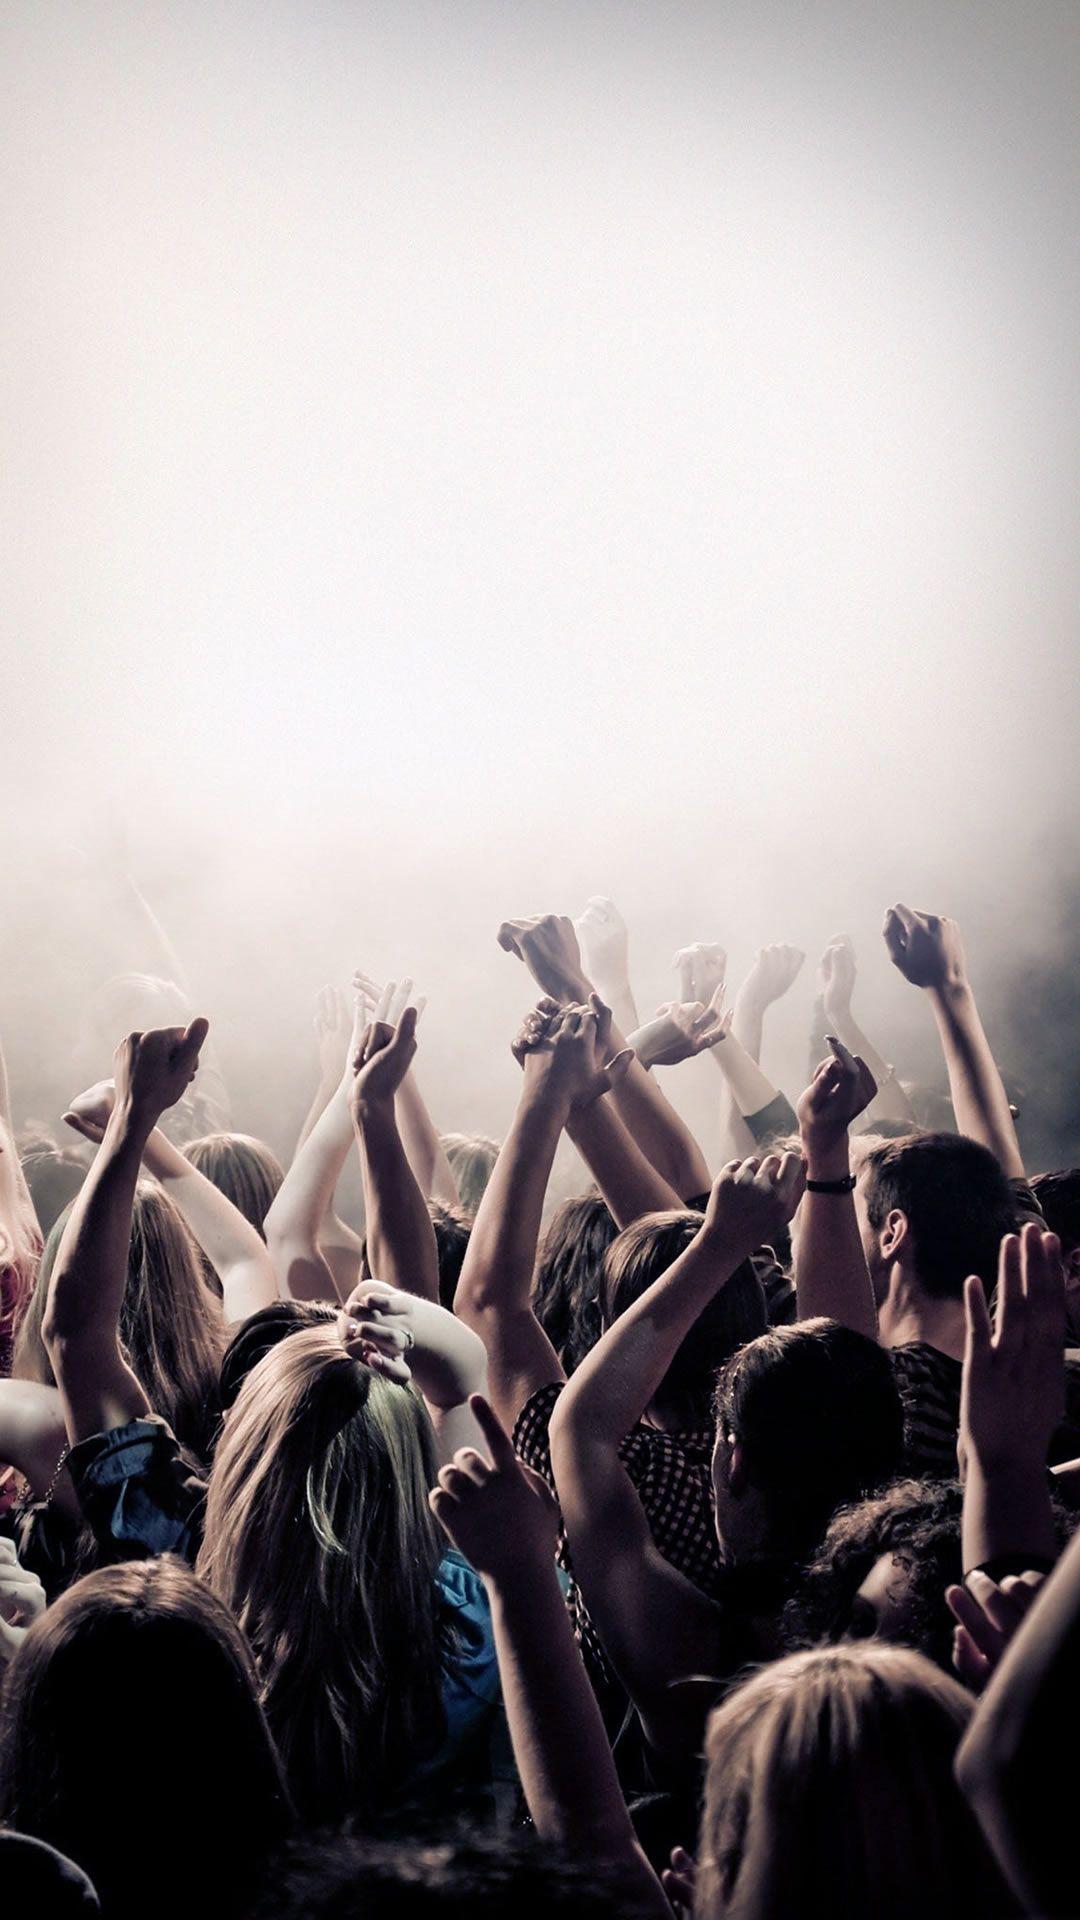 I am In Concert No Tomorrow #iPhone #plus #Wallpaper. iPhone 6 wallpaper, Concert, iPhone wallpaper